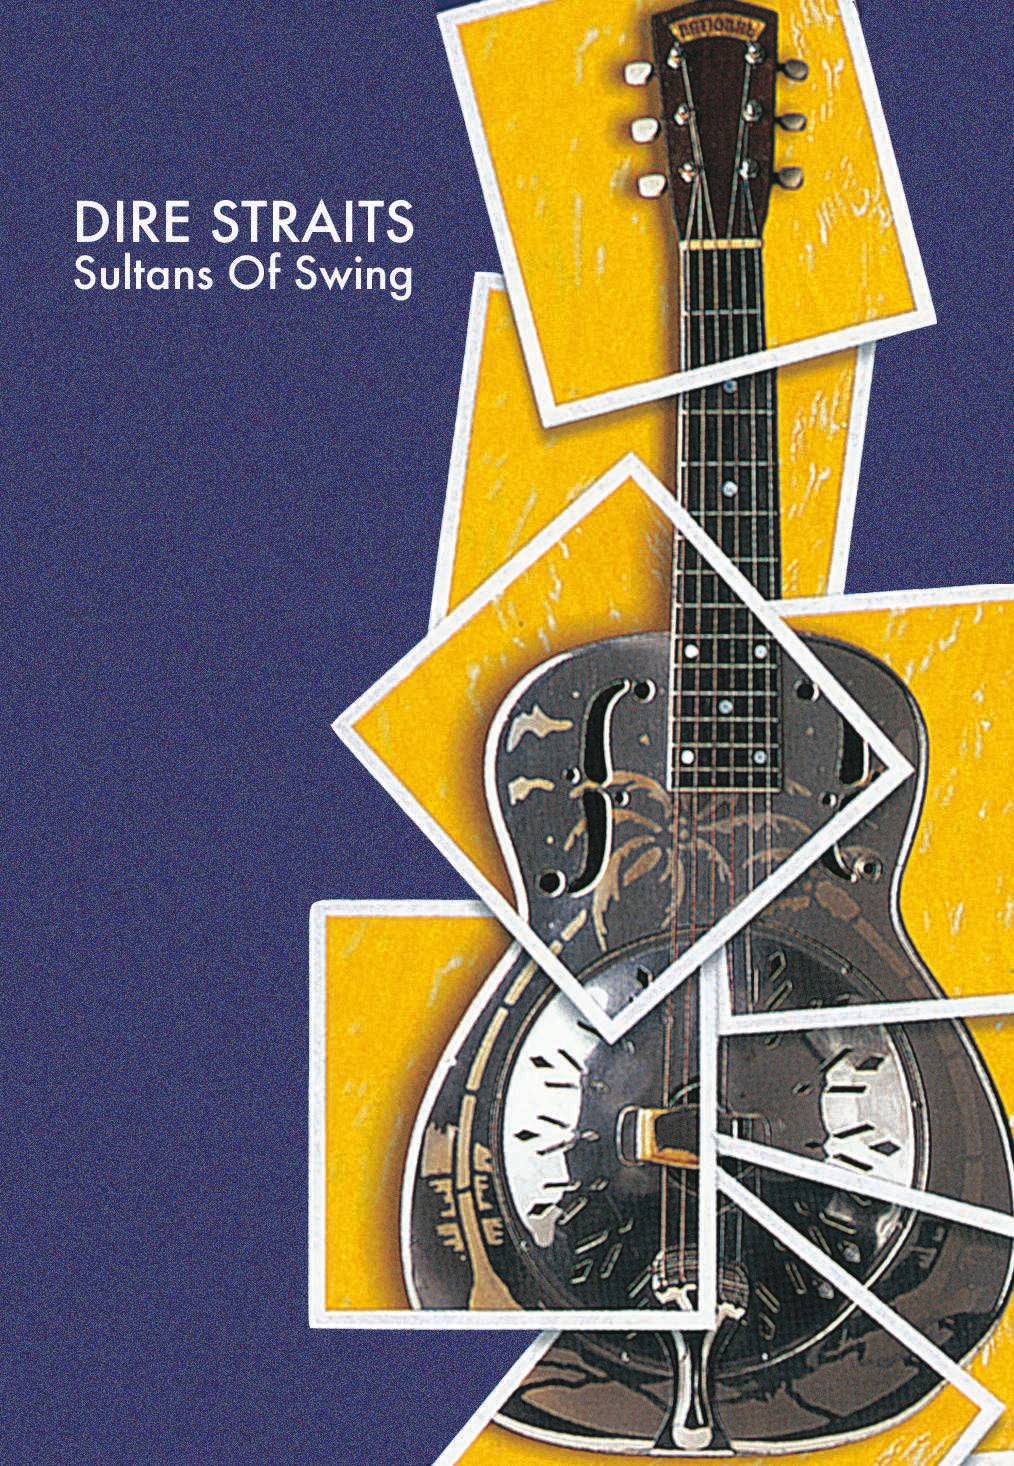 Dire Straits - Sultans Of Swing - Deluxe Sound & Vision NTSC - Dire Straits 